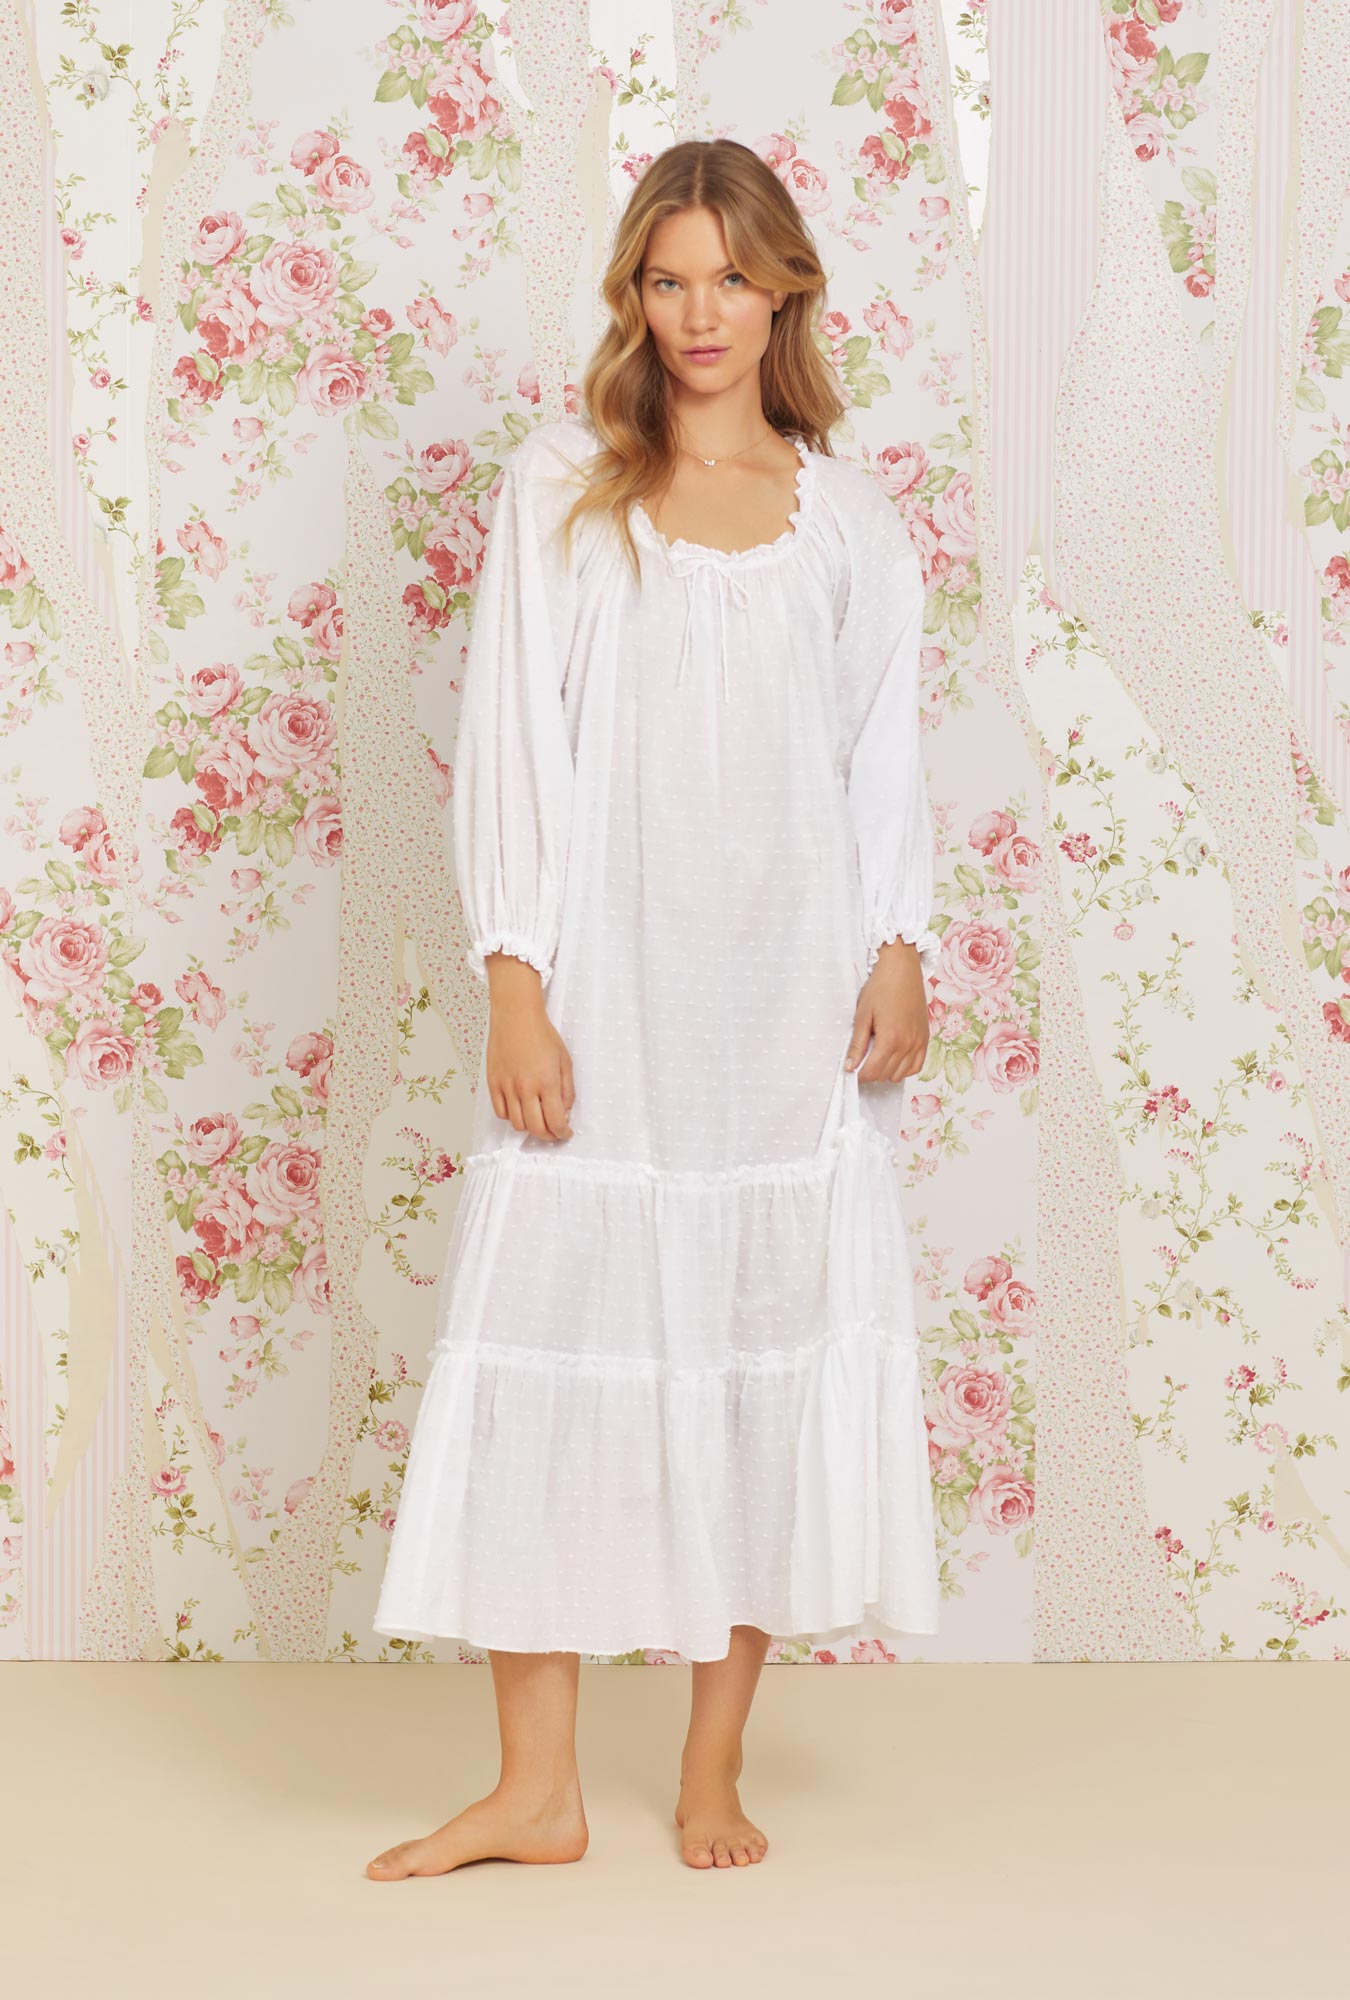 A lady wearing white long sleeve swiss dot bethany nightgown.